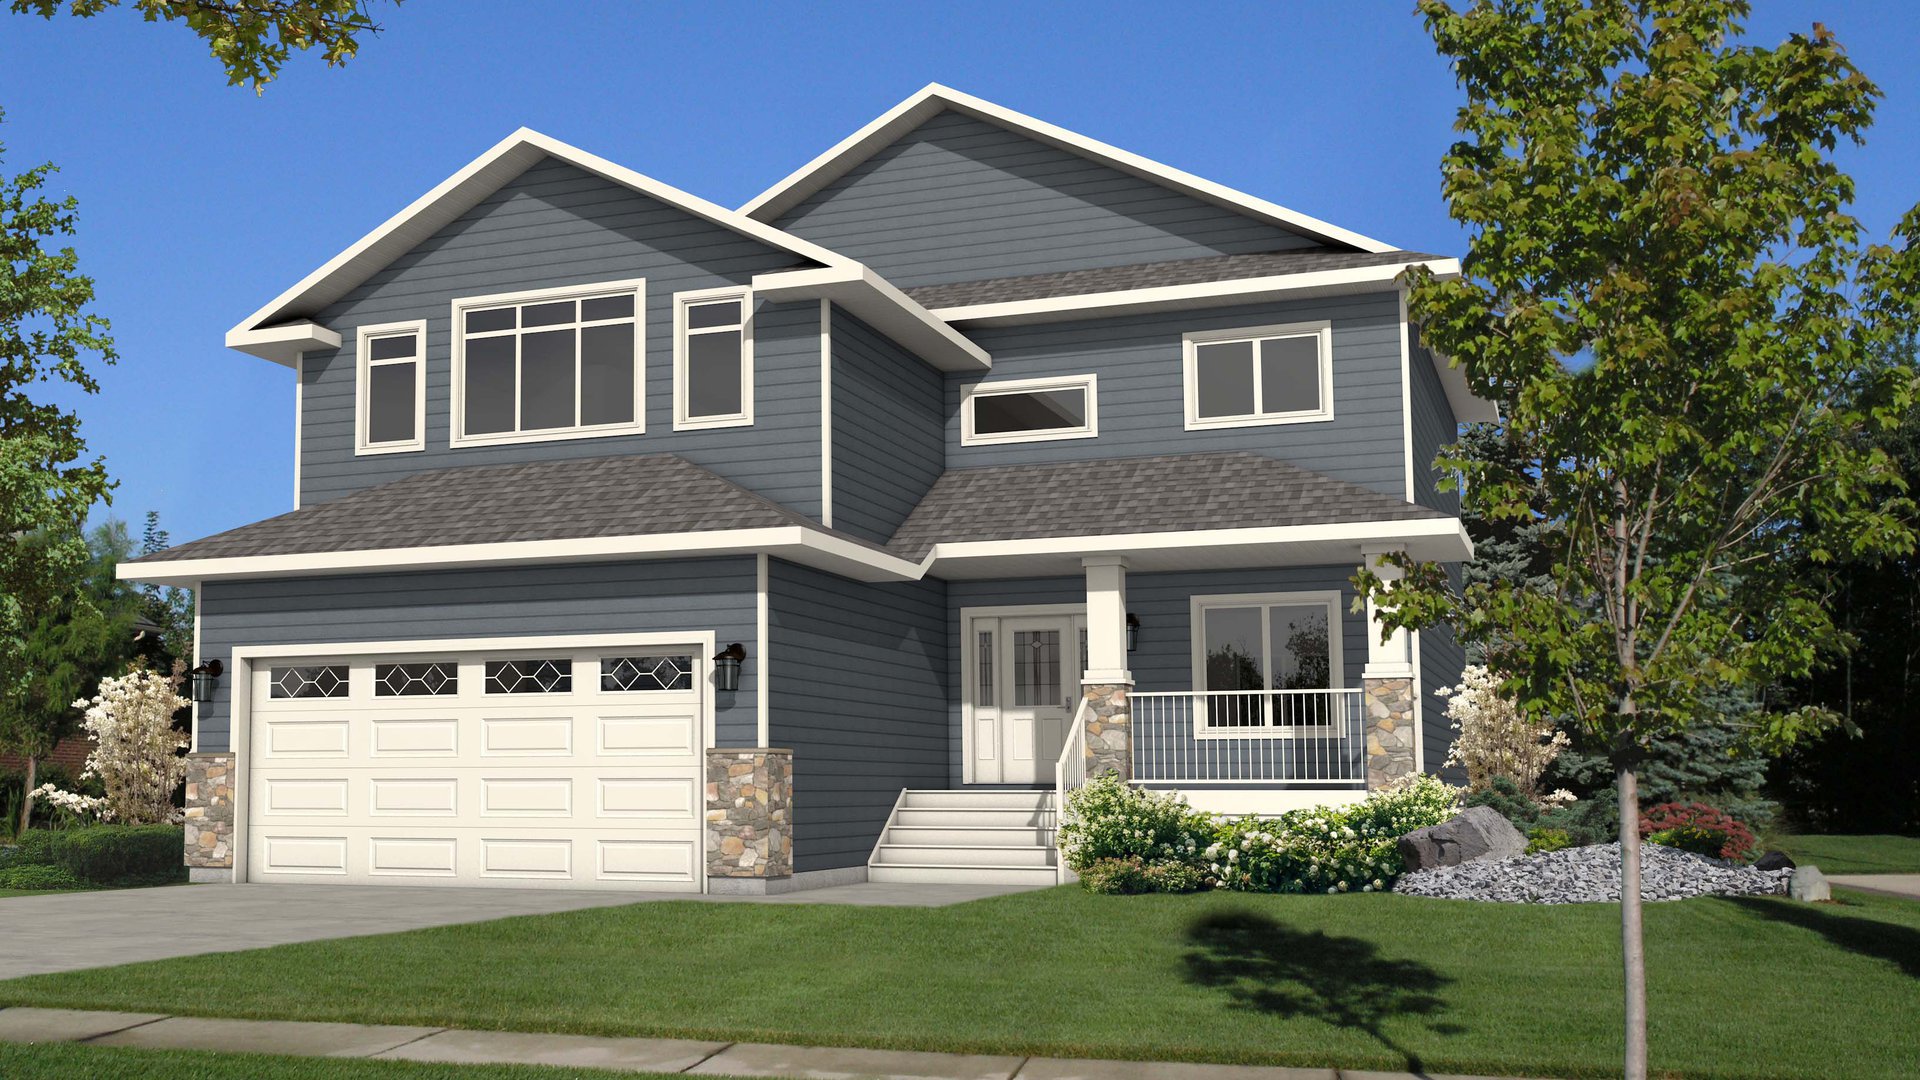 Sienna house plan modular homes nelson homes ready to move homes prefabricated home packages.jpg